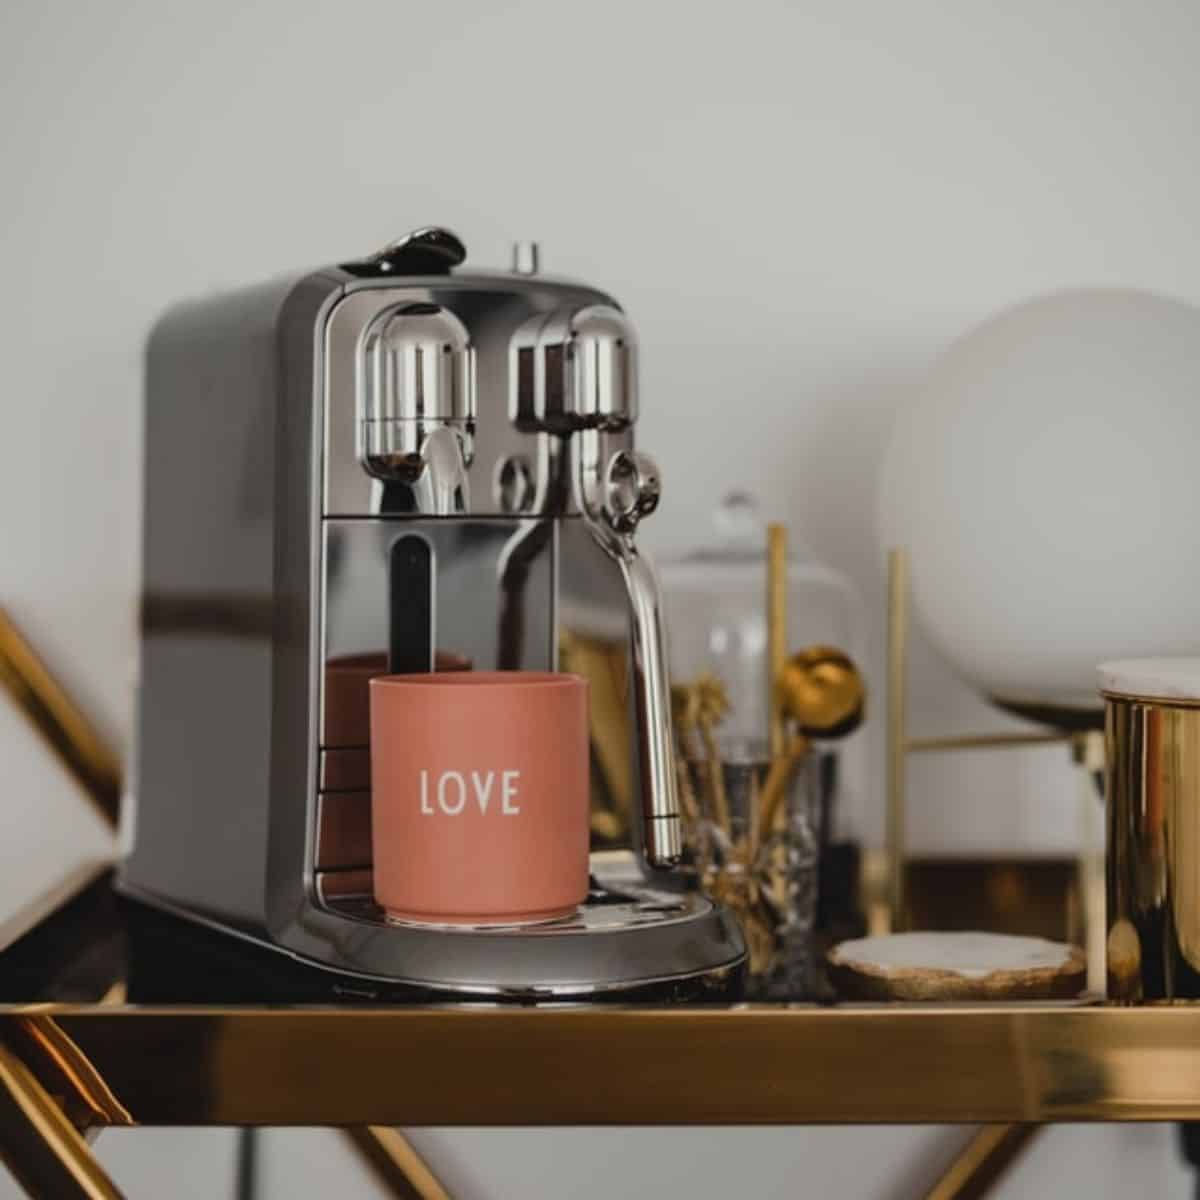 8 Best Coffee Makers For Luxury Kitchens